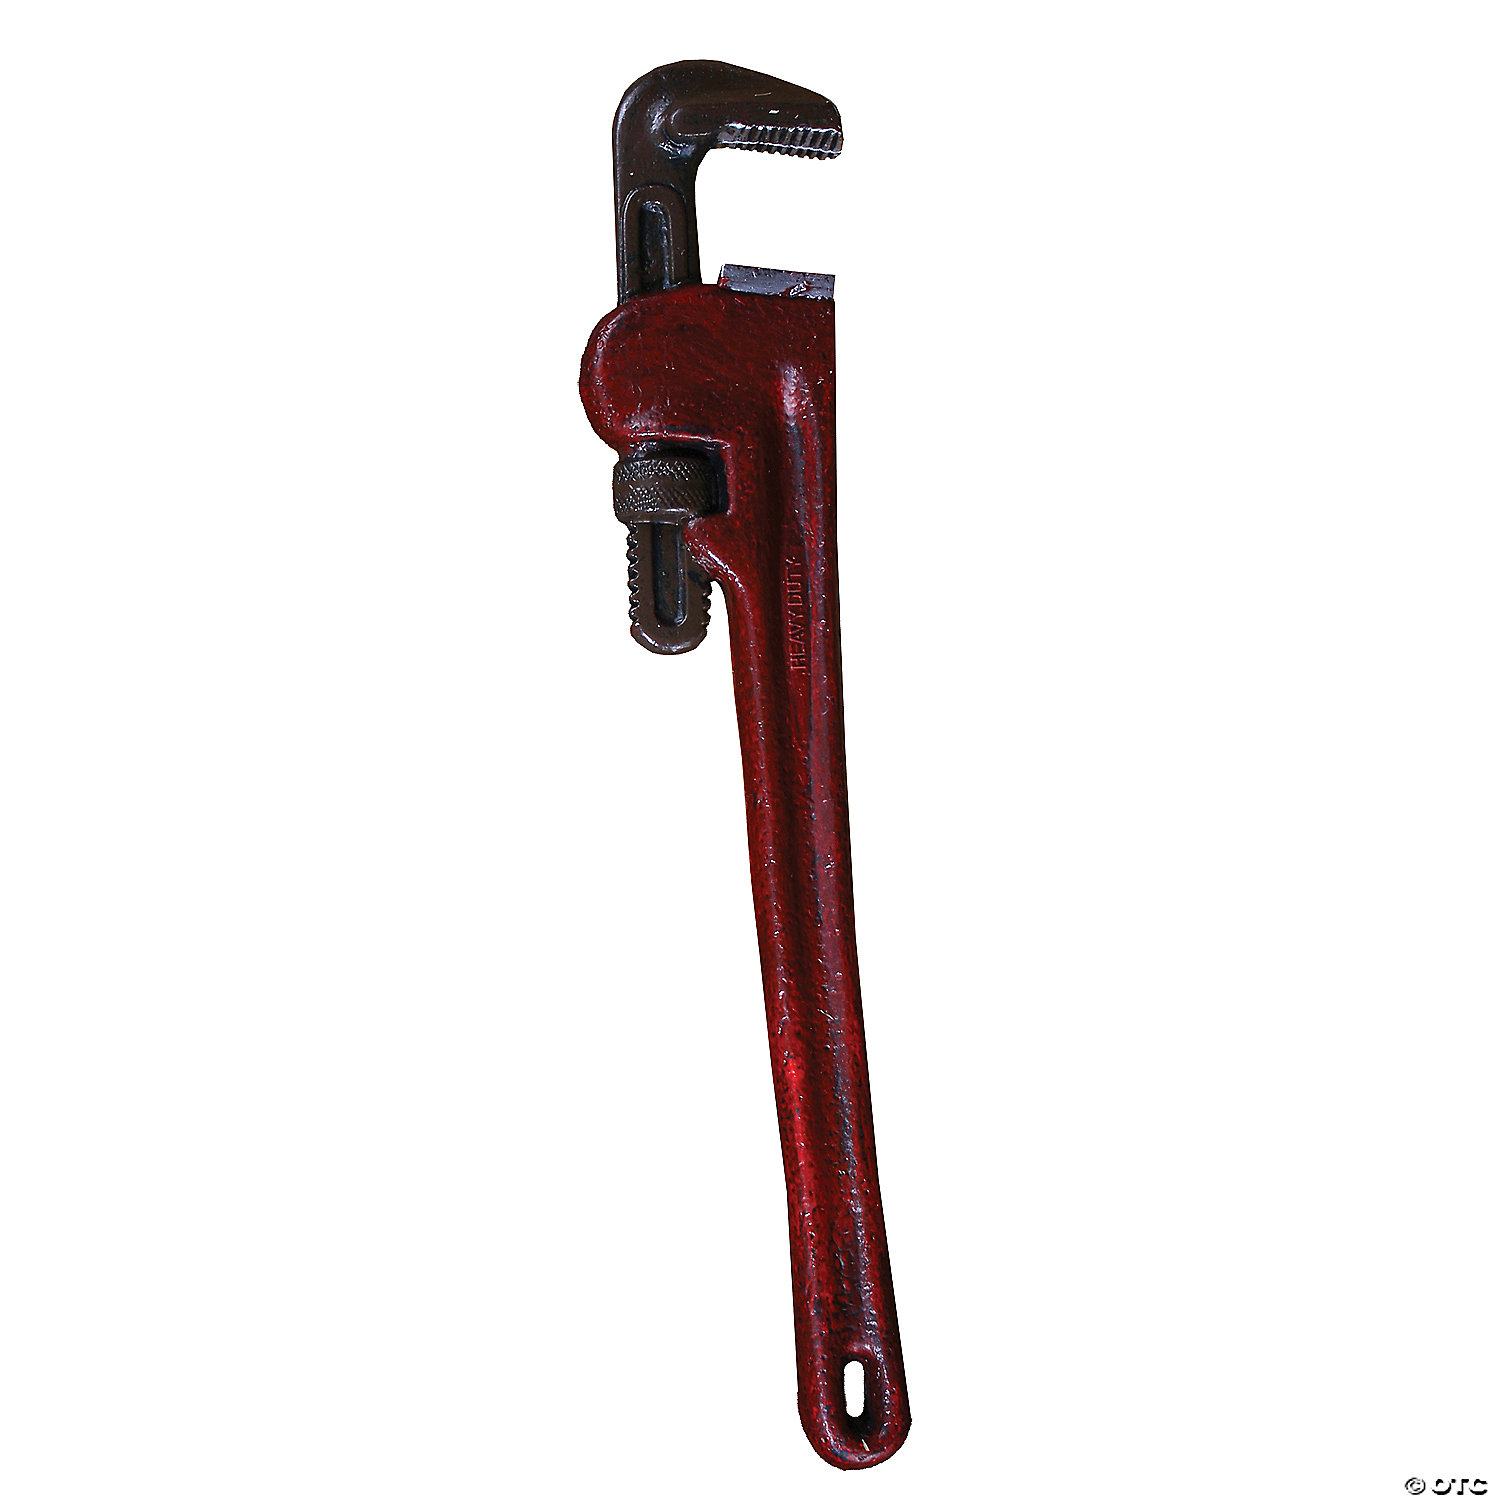 HORROR TOOLS CROWBAR OR PIPEWRENCH - HALLOWEEN